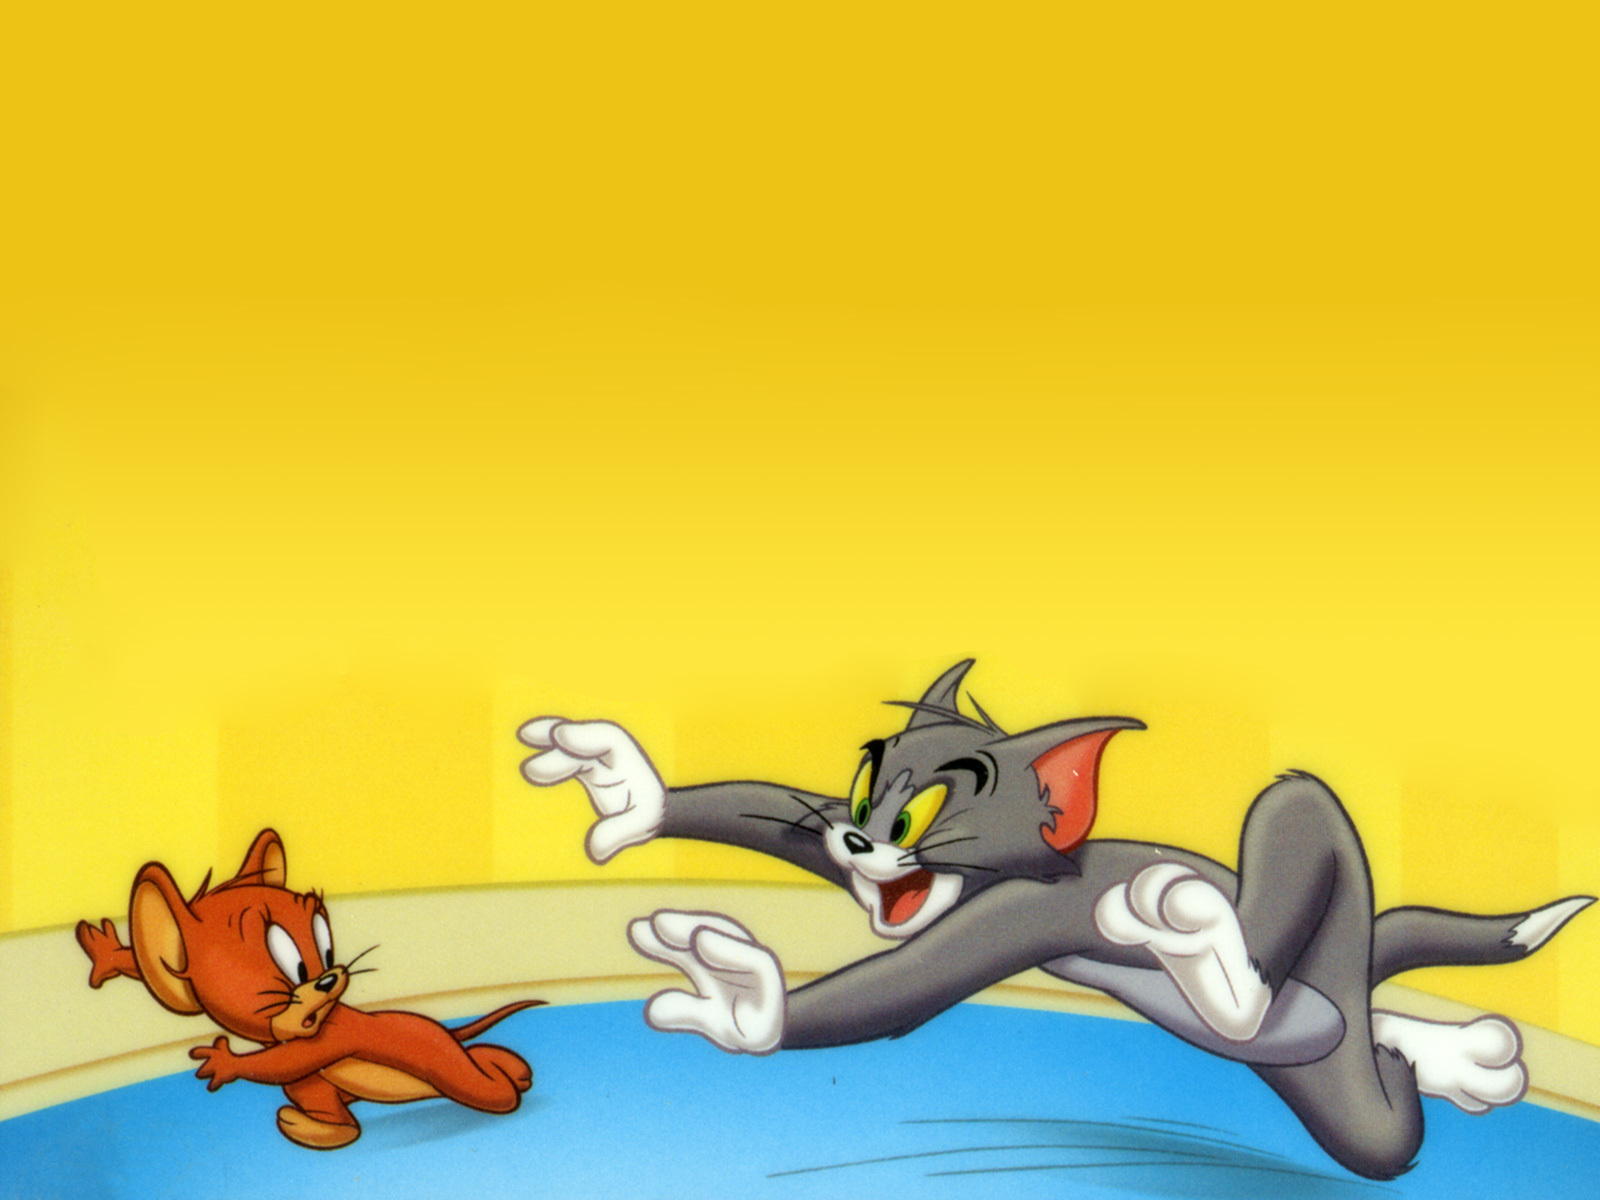 Tom-and-Jerry-Wallpaper-tom-and-jerry-2507494-1600-1200.jpg